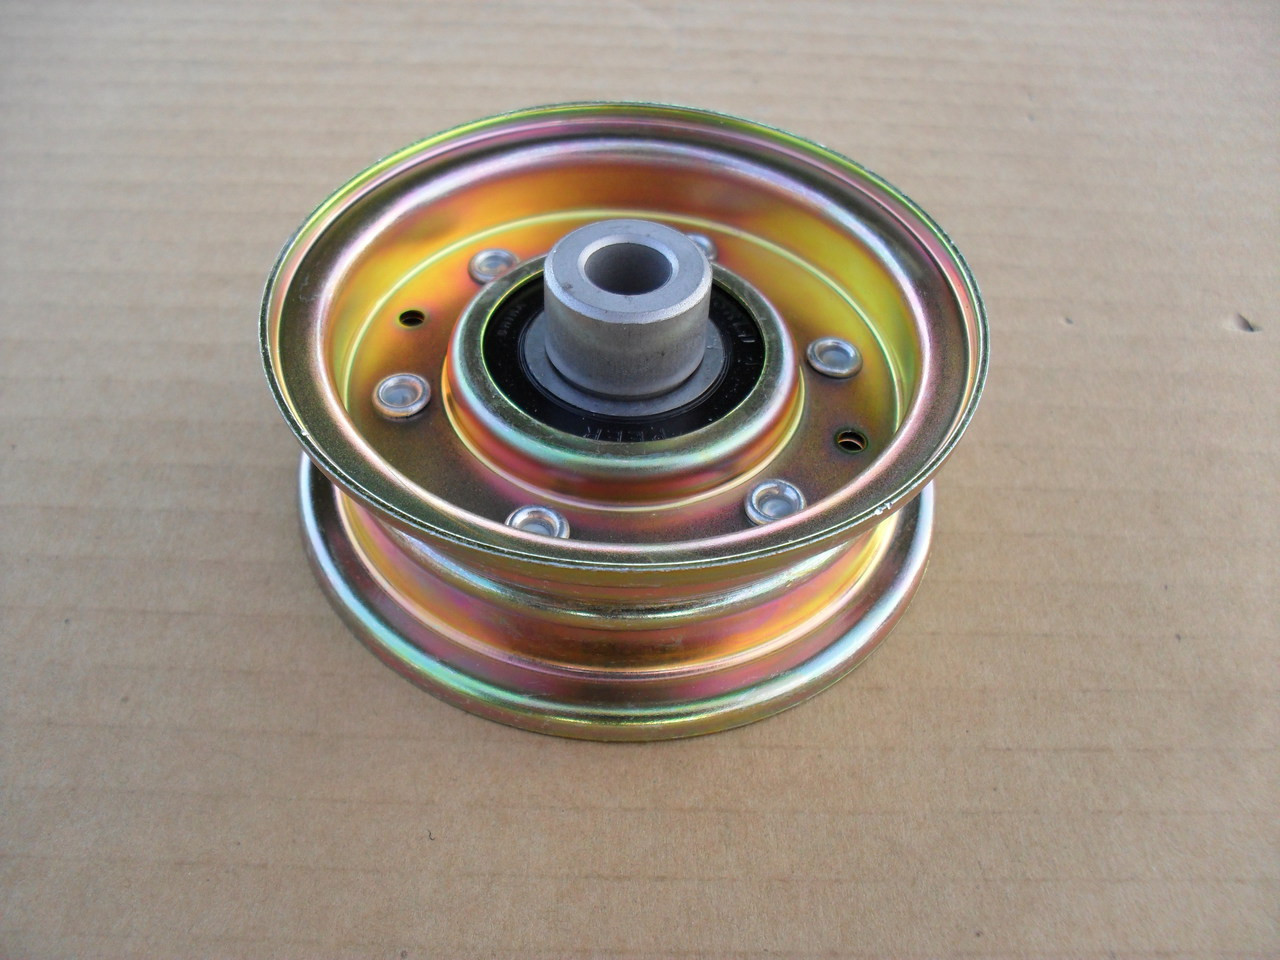 Flat Idler Pulley for Snapper 76500 7076500 7076500YP 7-6500 ID: 3/8" OD: 3-1/4"